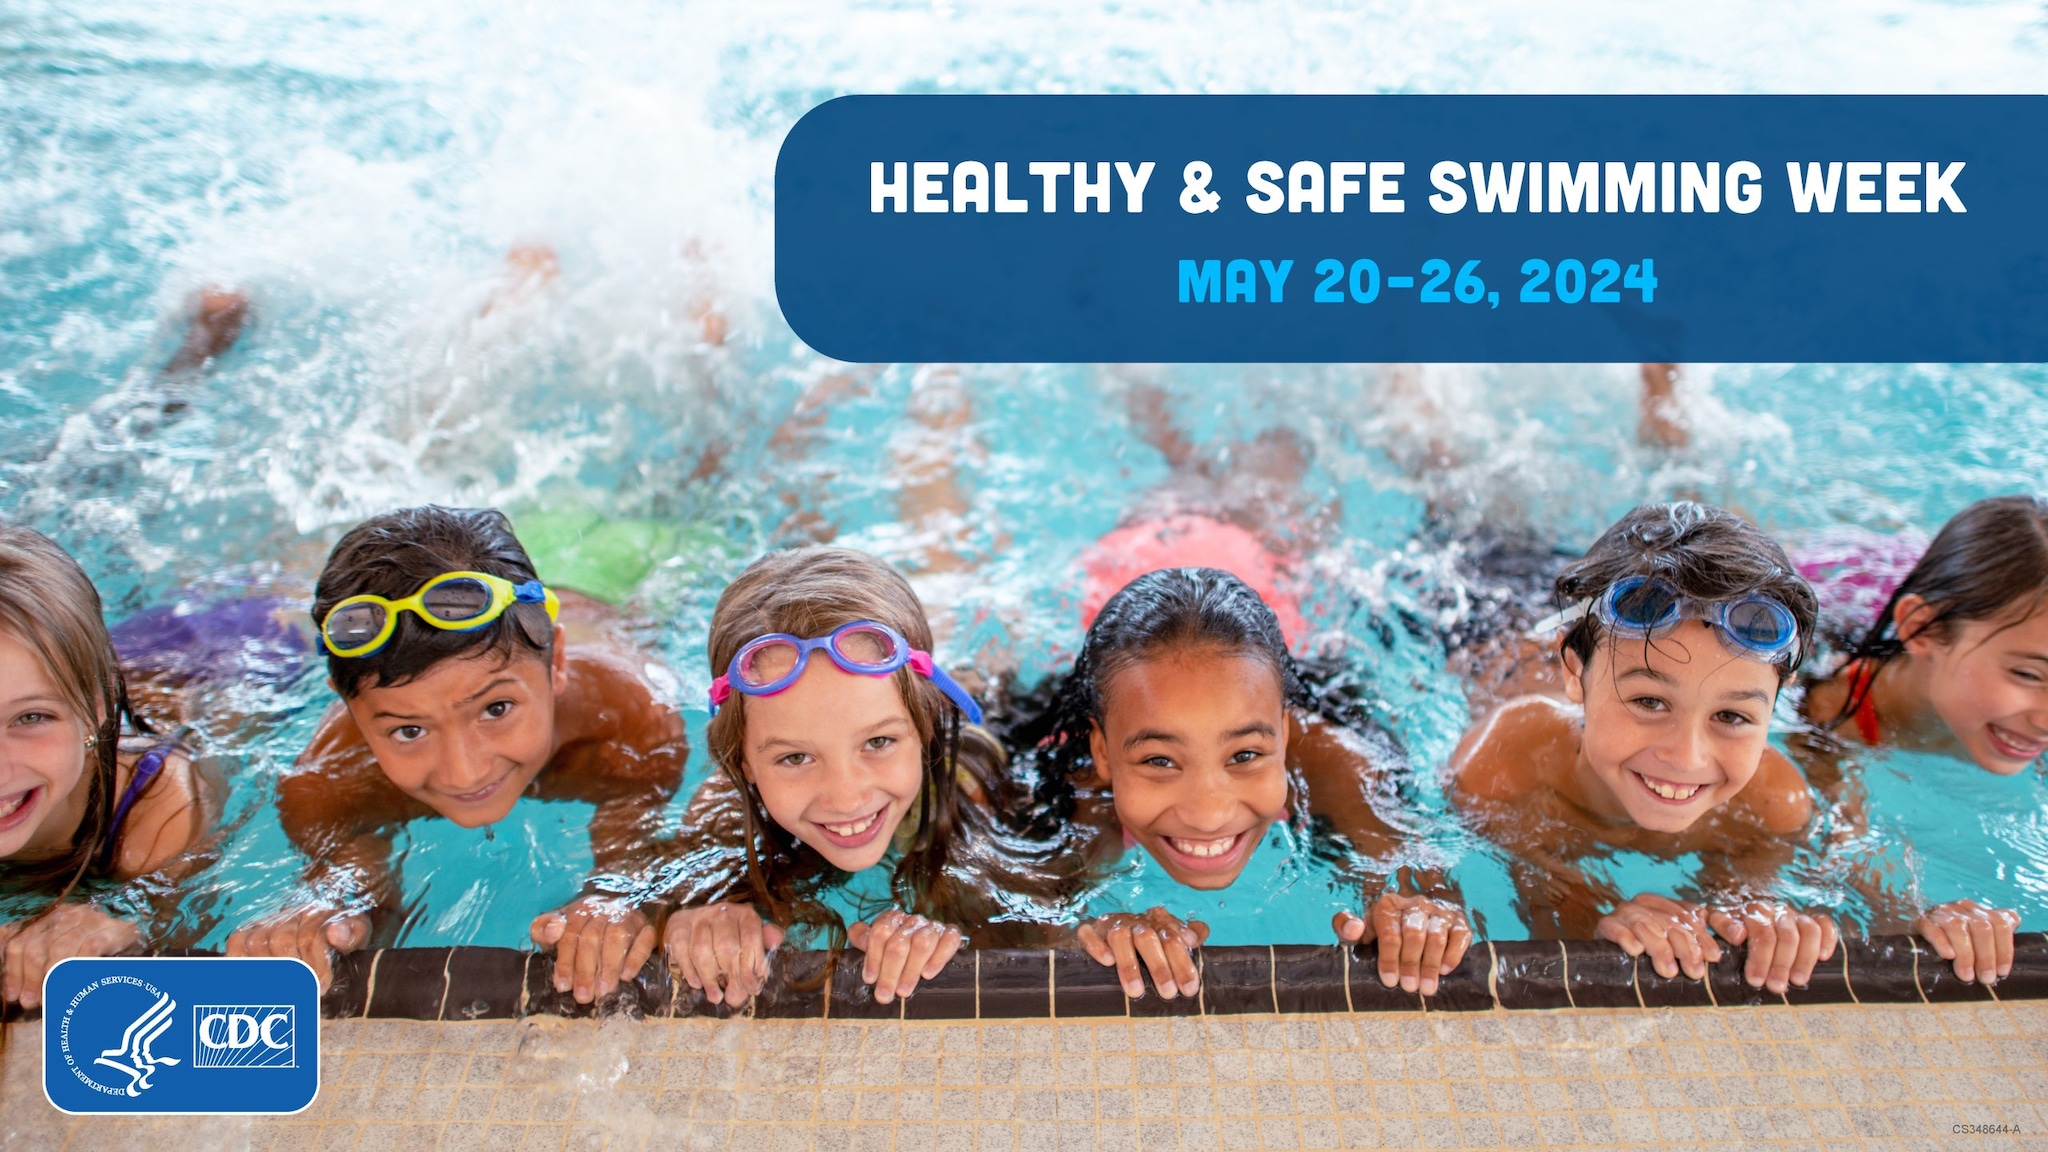 Children in a pool holding on to the edge and kicking their legs behind them while all in a row smiling.